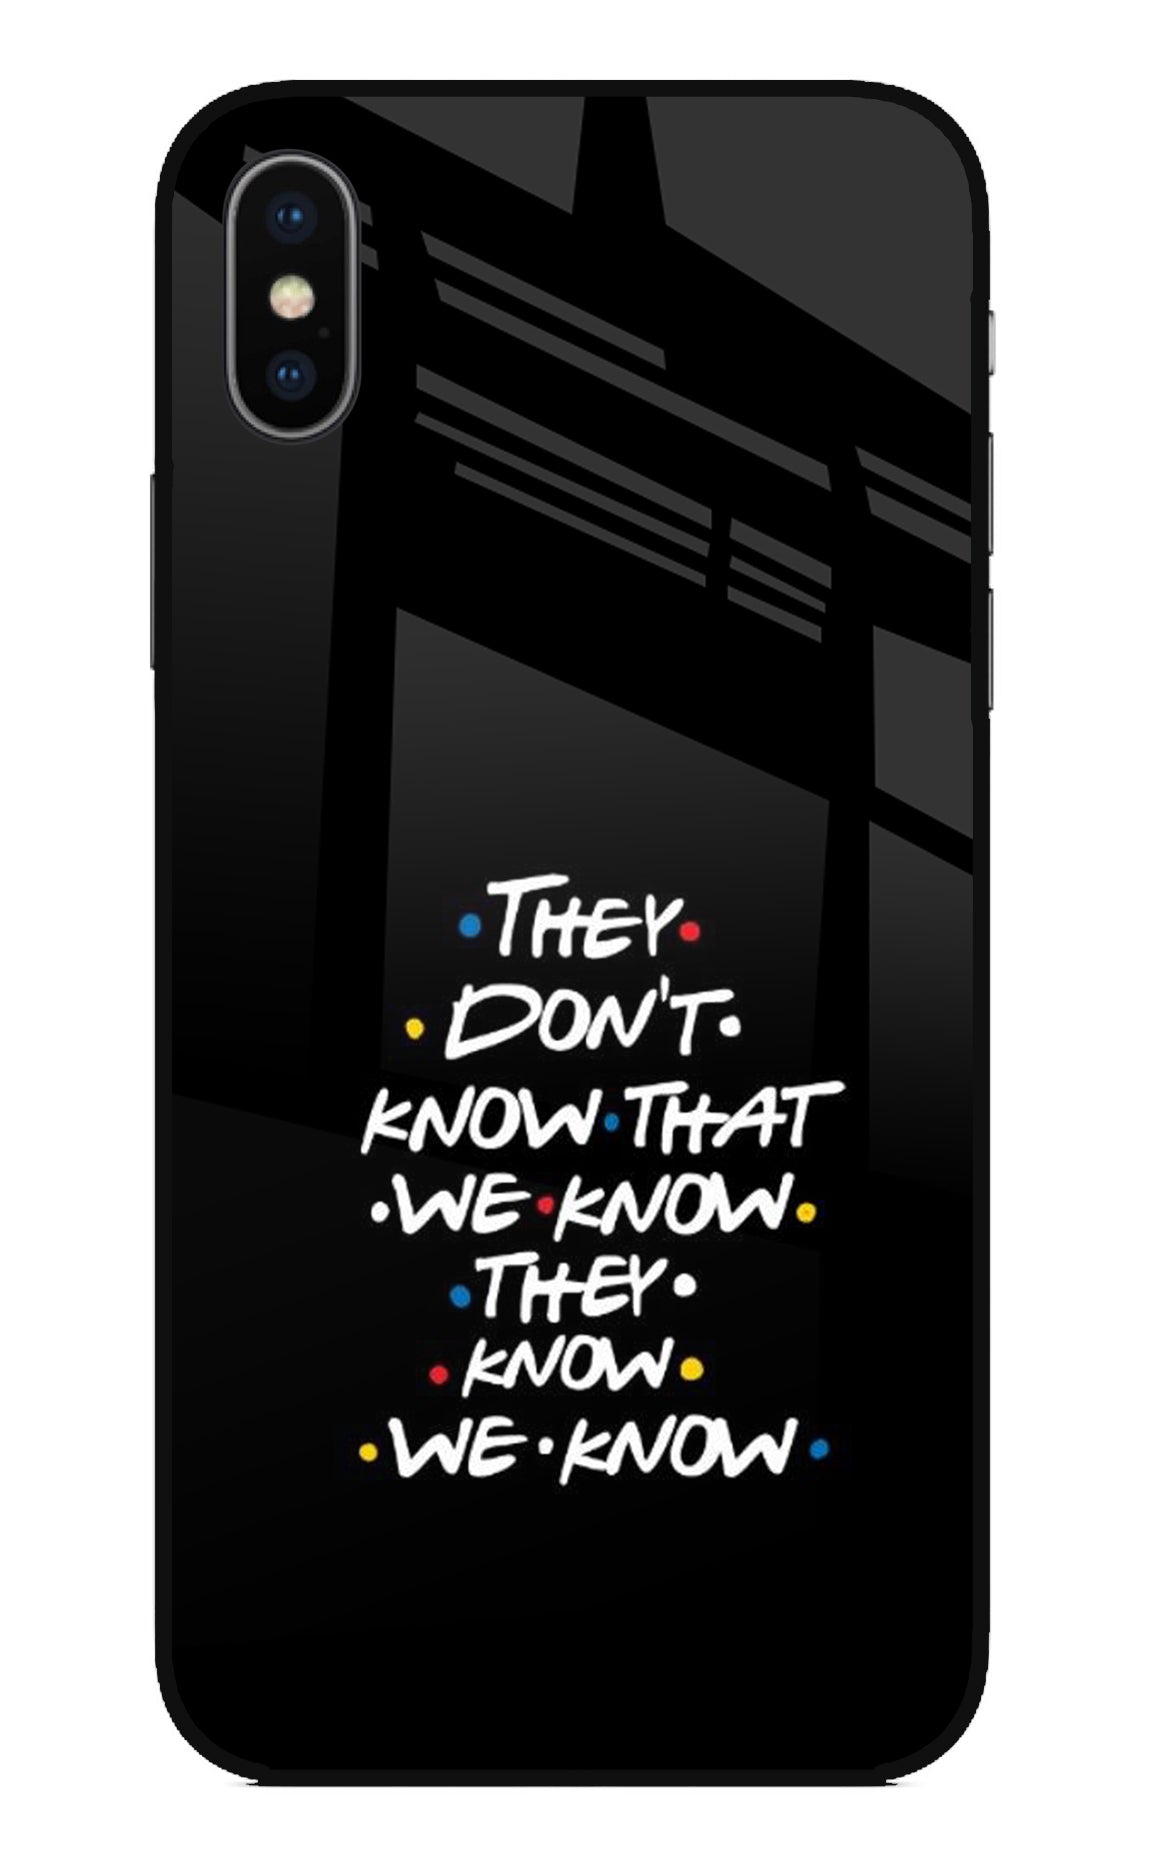 FRIENDS Dialogue iPhone X Back Cover